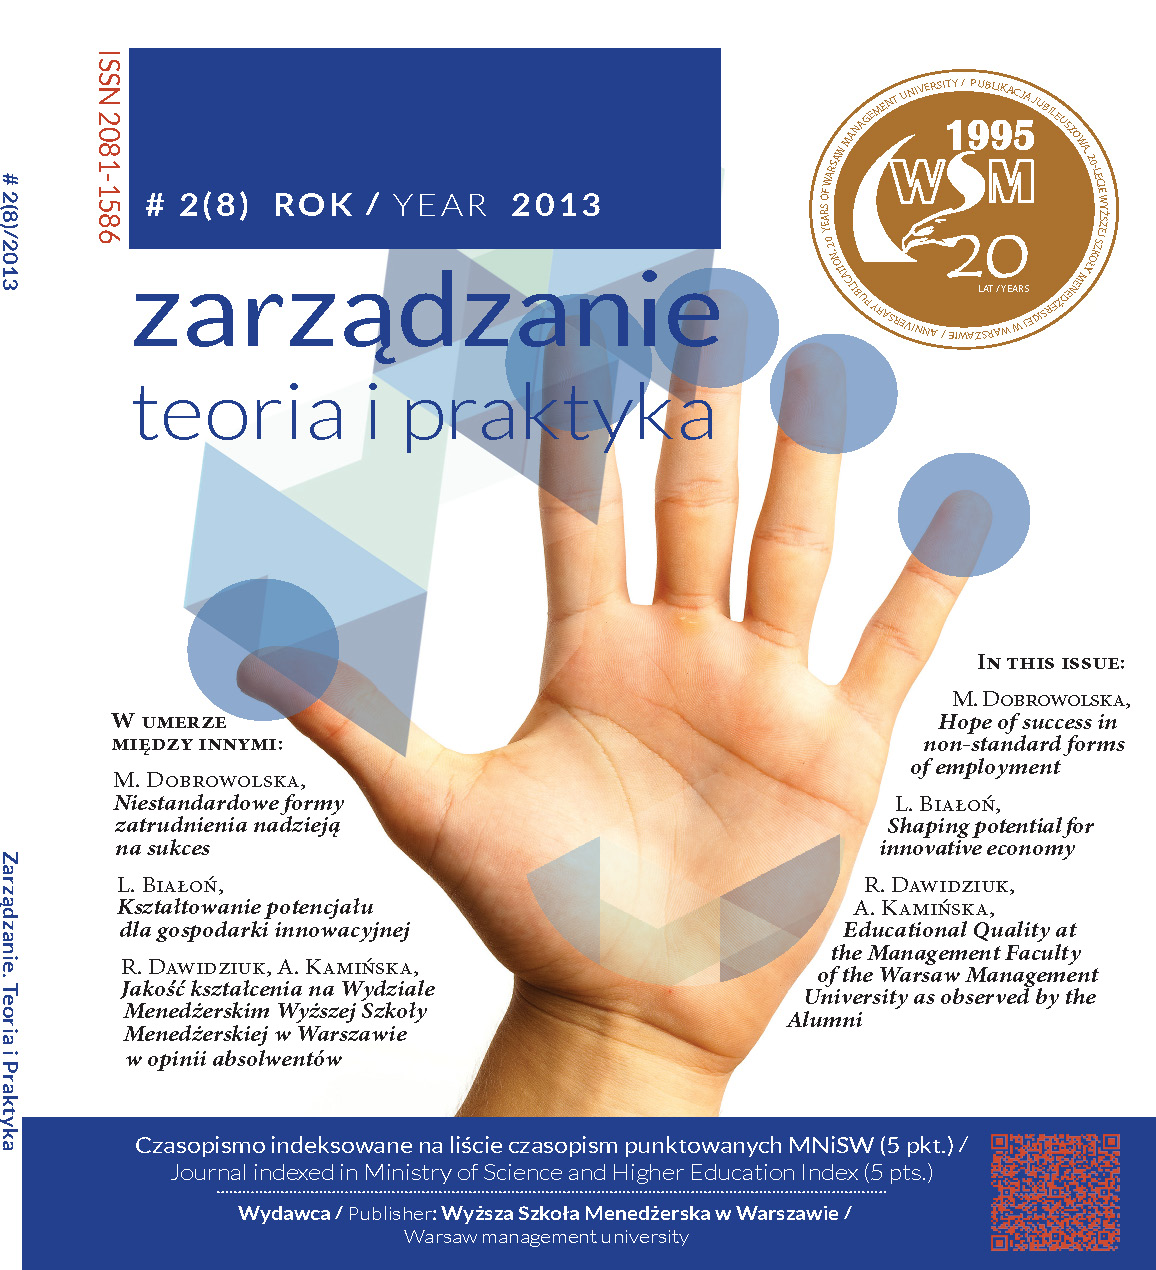 Educational Quality at the 
Management Faculty of the Warsaw Management University as observed by the Alumni Cover Image